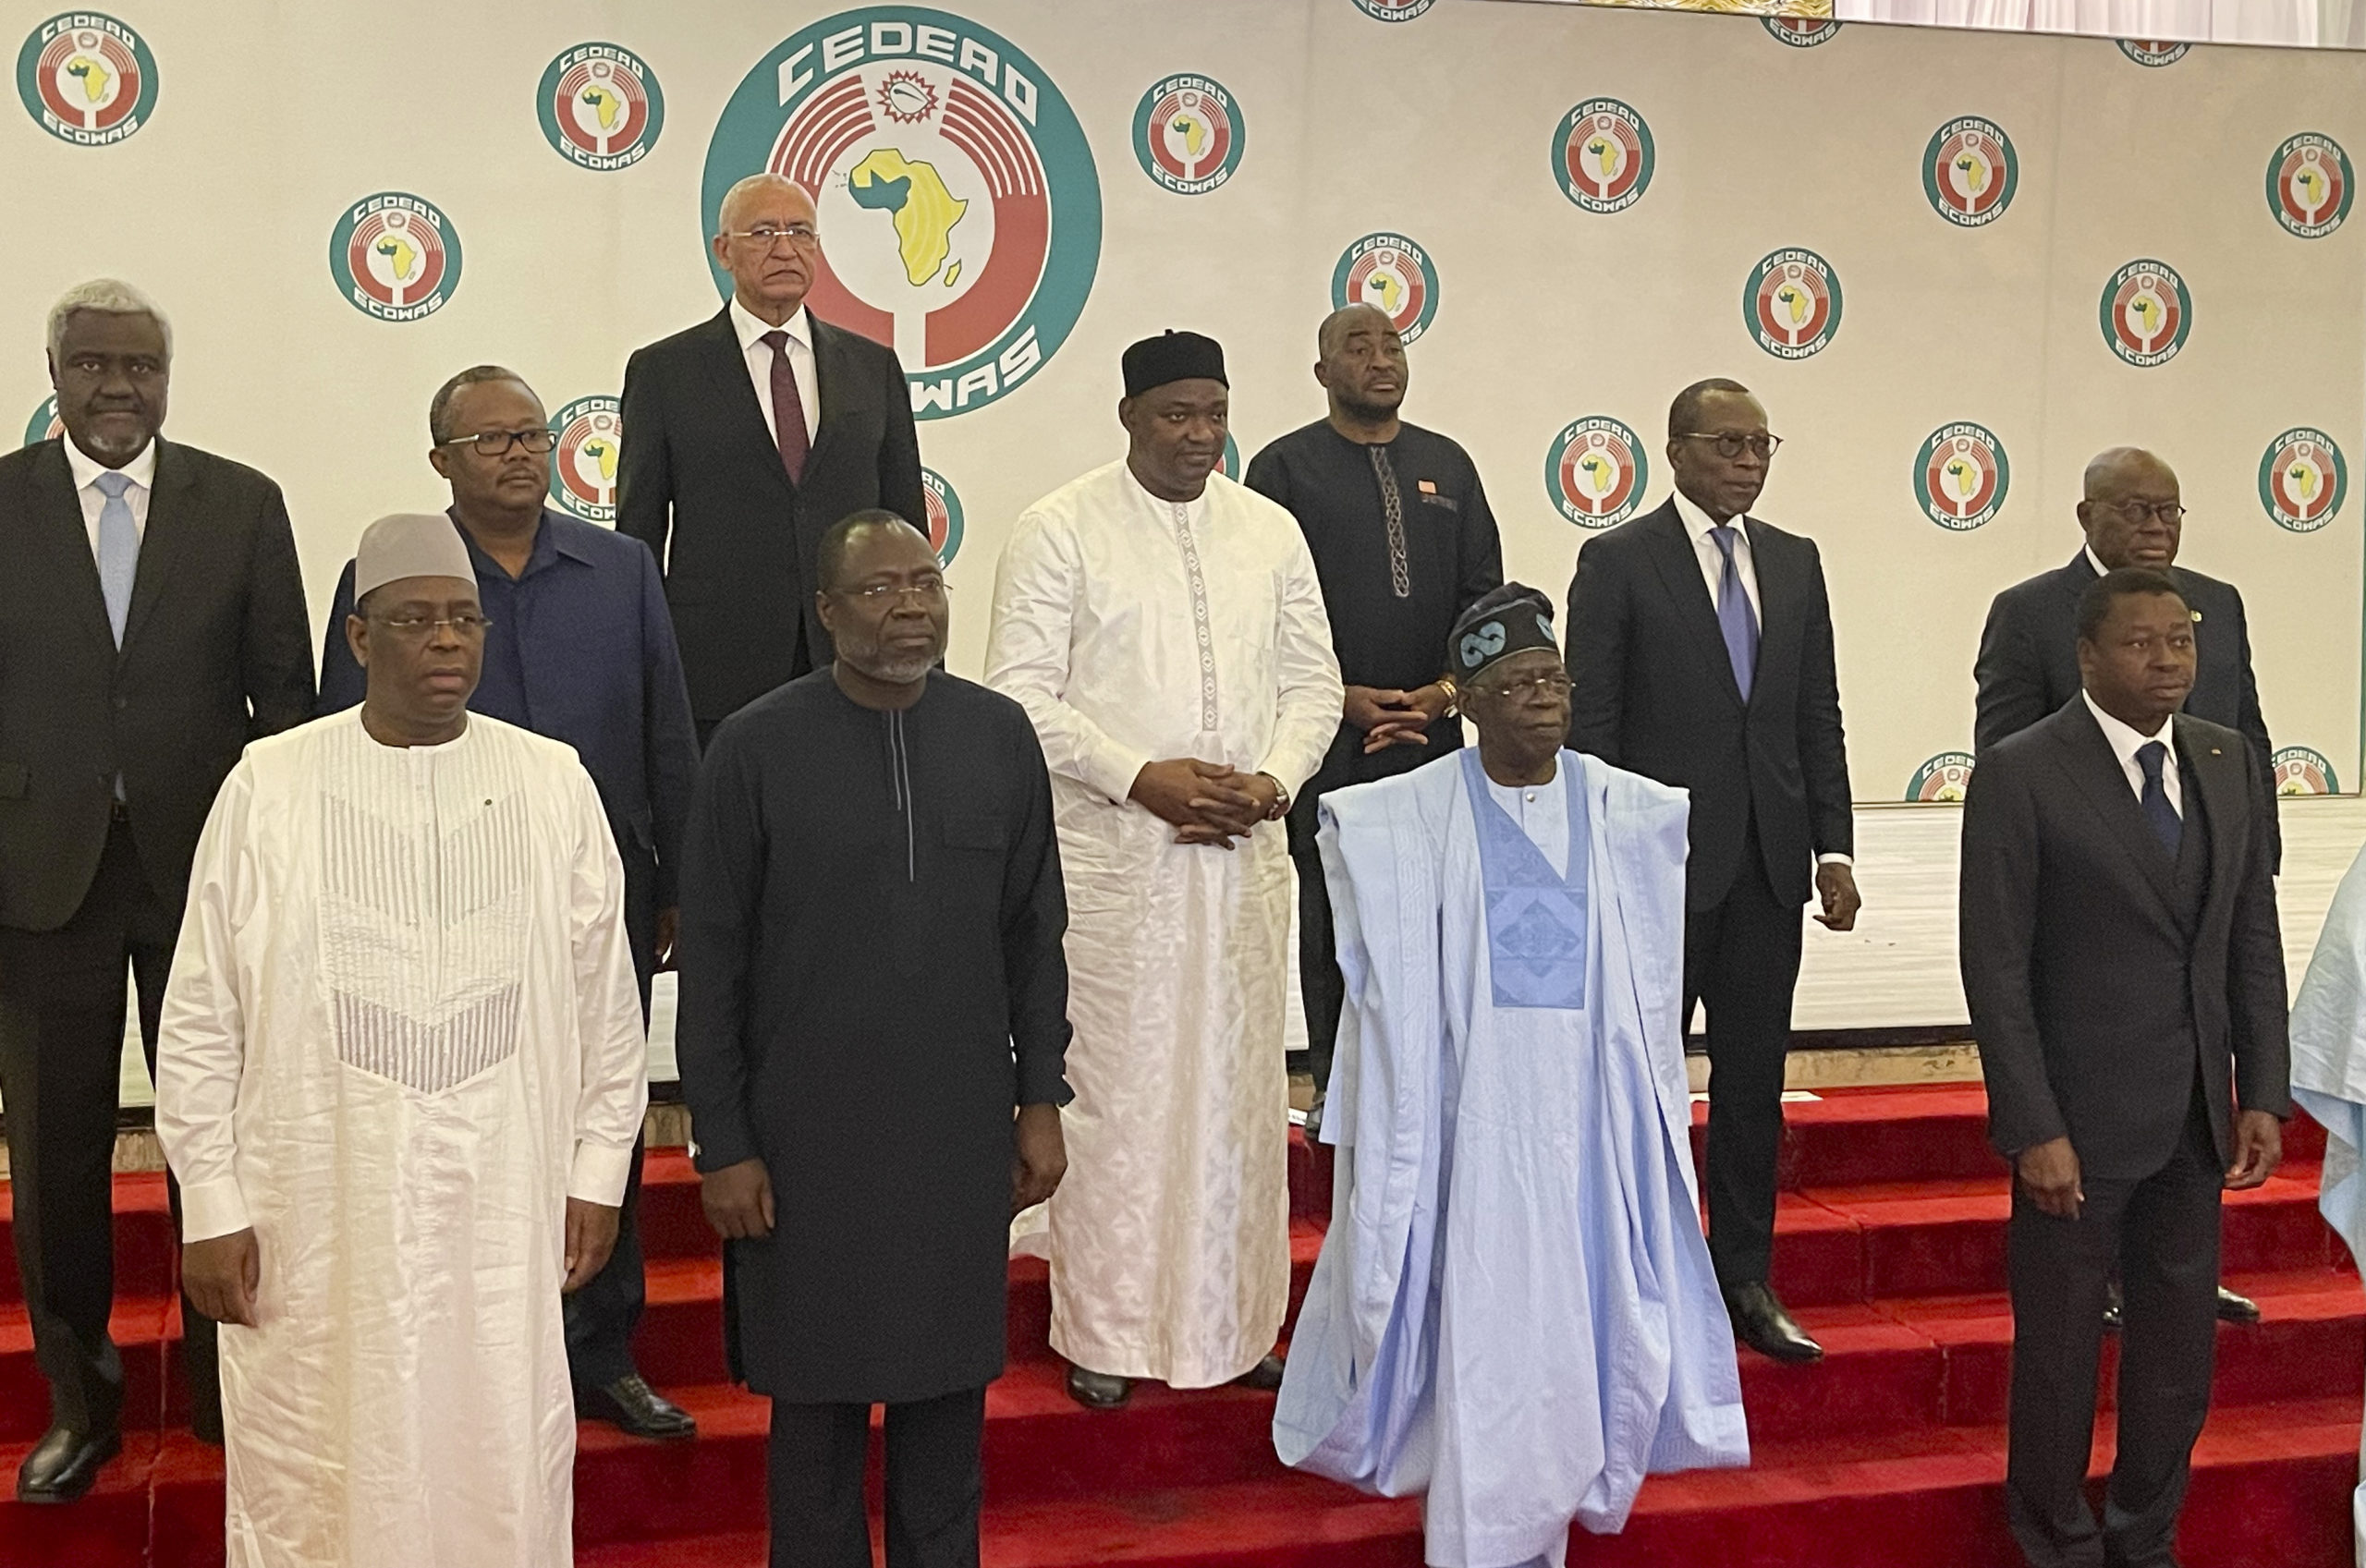 Nigeria President, Bola Ahmed Tinubu, second from left, poses , for a group photograph with other West Africa leaders after a meeting in Abuja Nigeria, Sunday, July 30, 2023. At an emergency meeting Sunday in Abuja, Nigeria, the West African bloc known as ECOWAS said that it was suspending relations with Niger, and authorized the use of force if President Mohamed Bazoum is not reinstated within a week. The African Union has issued a 15-day ultimatum to the junta in Niger to reinstall the democratically elected government.